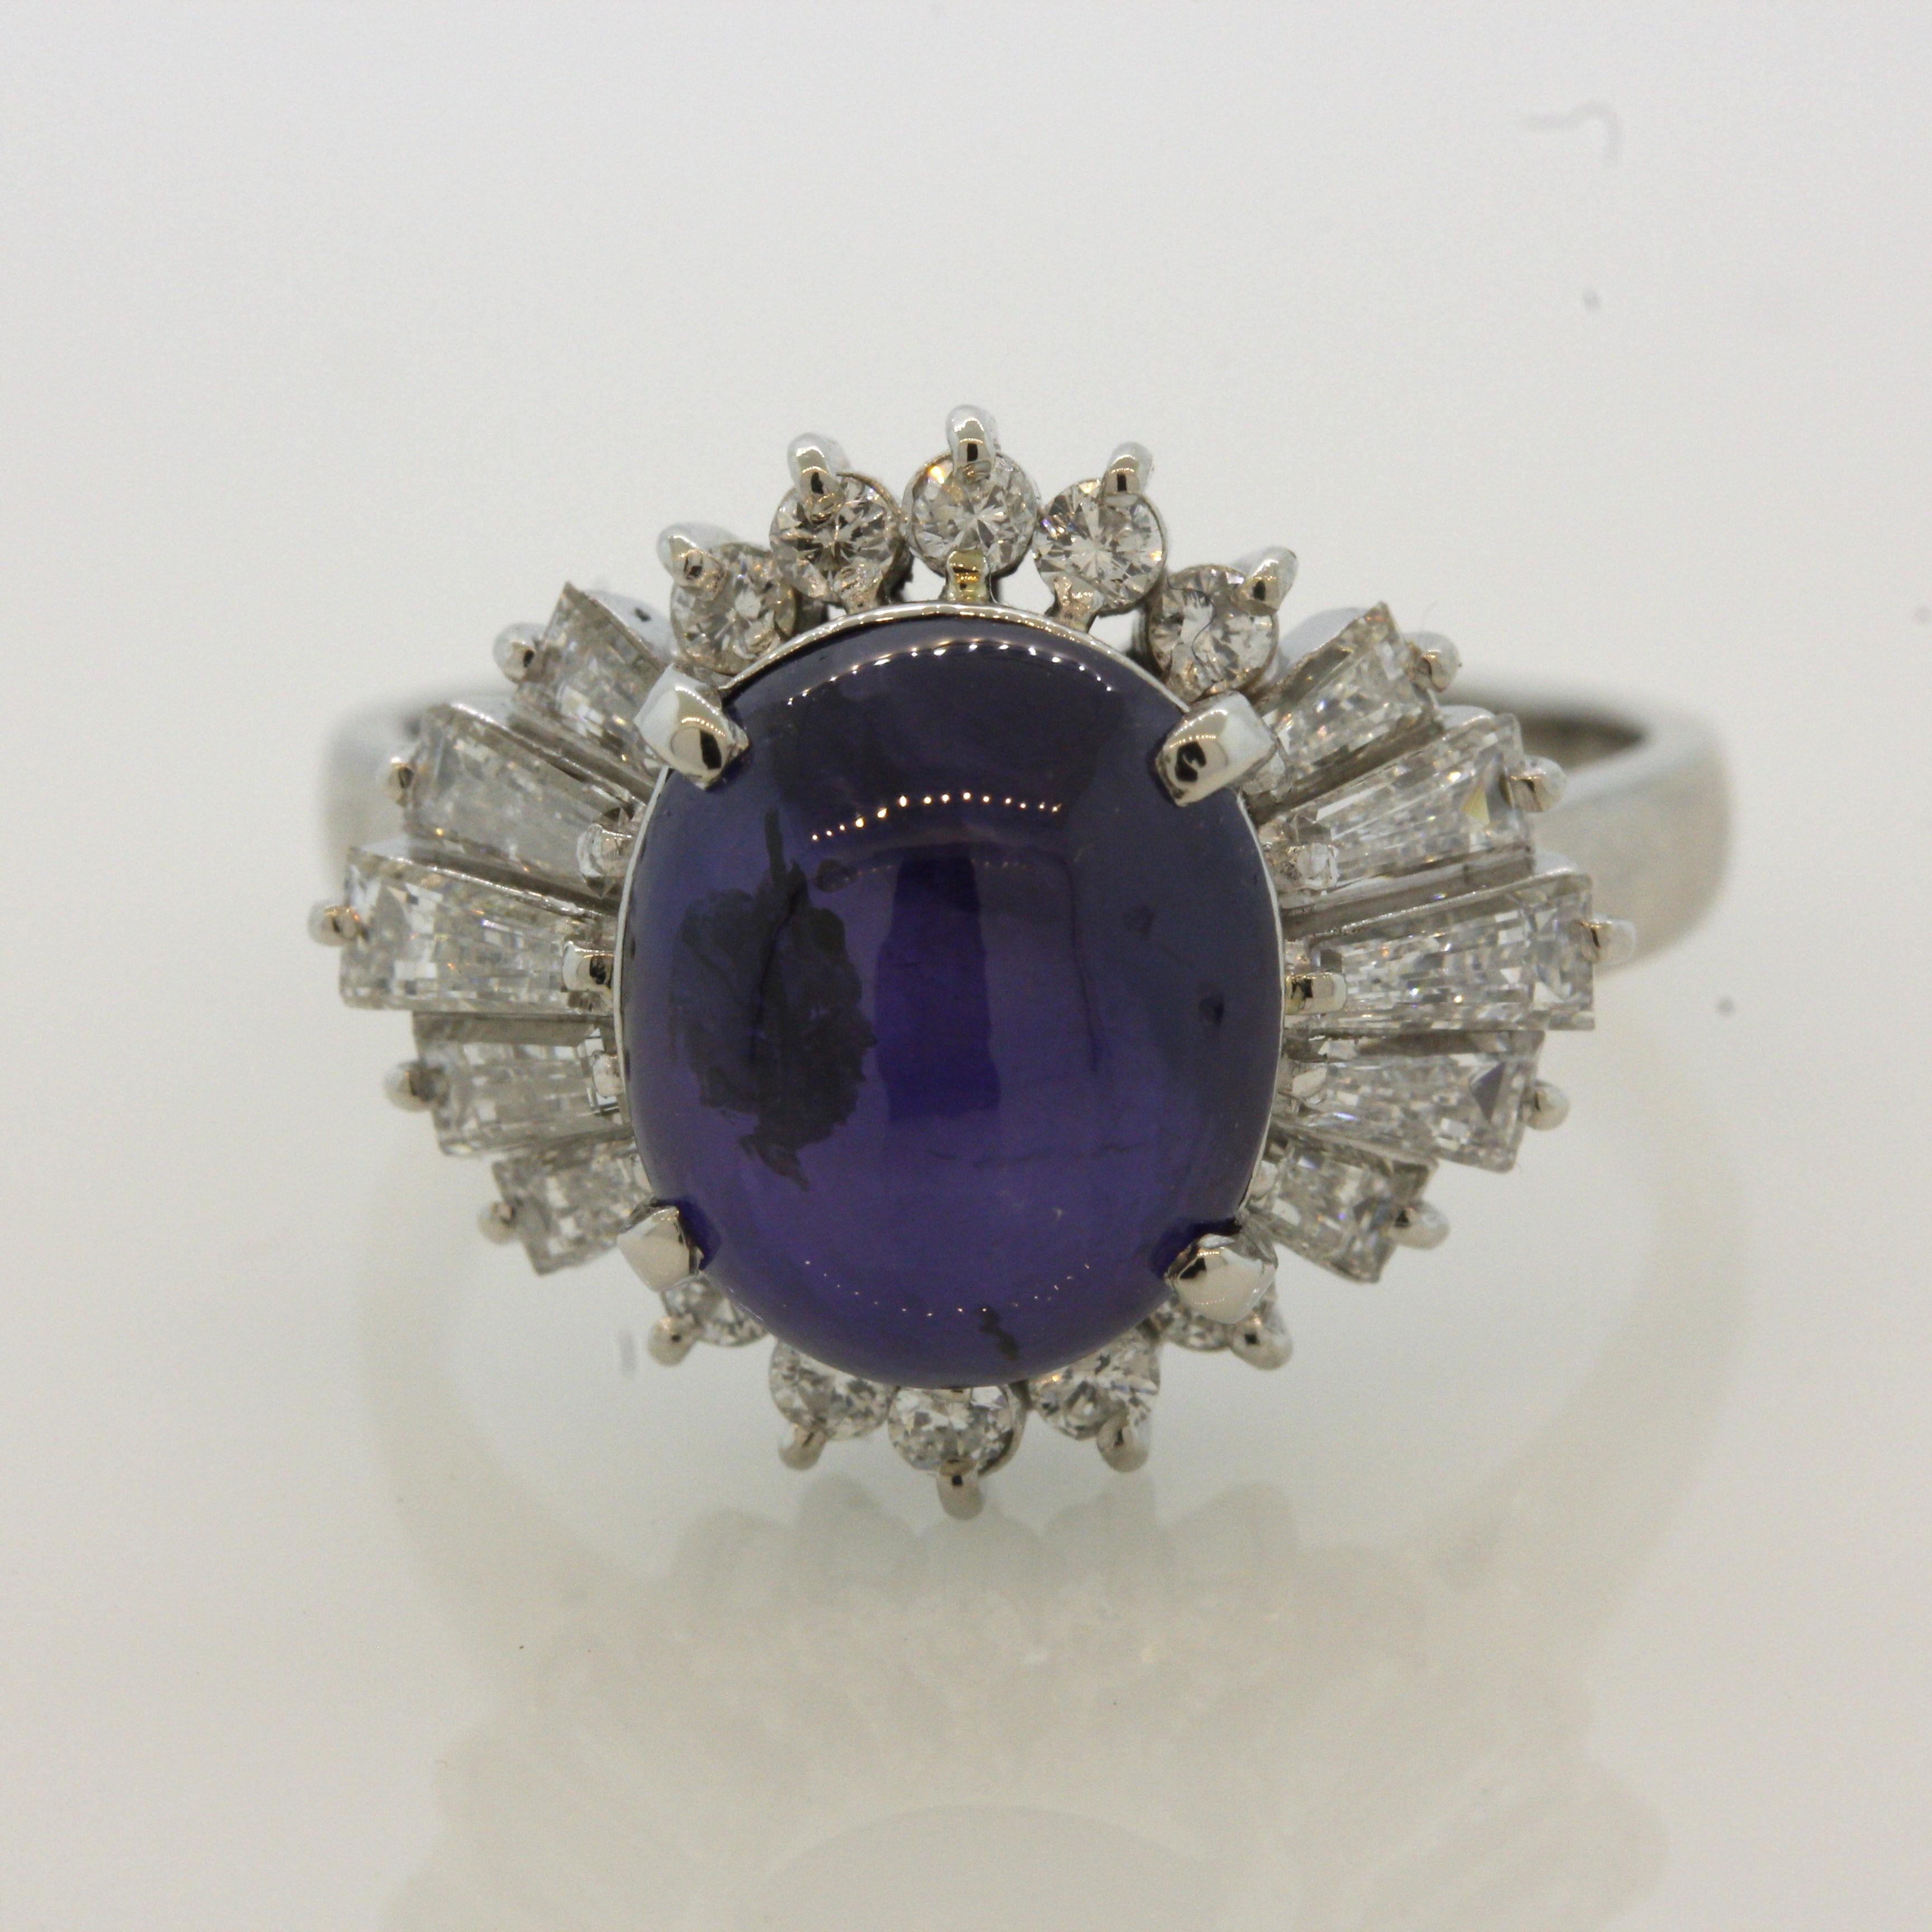 A beautiful richly colored natural star sapphire takes center stage of this platinum made ring. It weighs 7.06 carats and has a rich glowing purple color along with a complete 6-rayed star on its center when a light hits its top. It is complemented